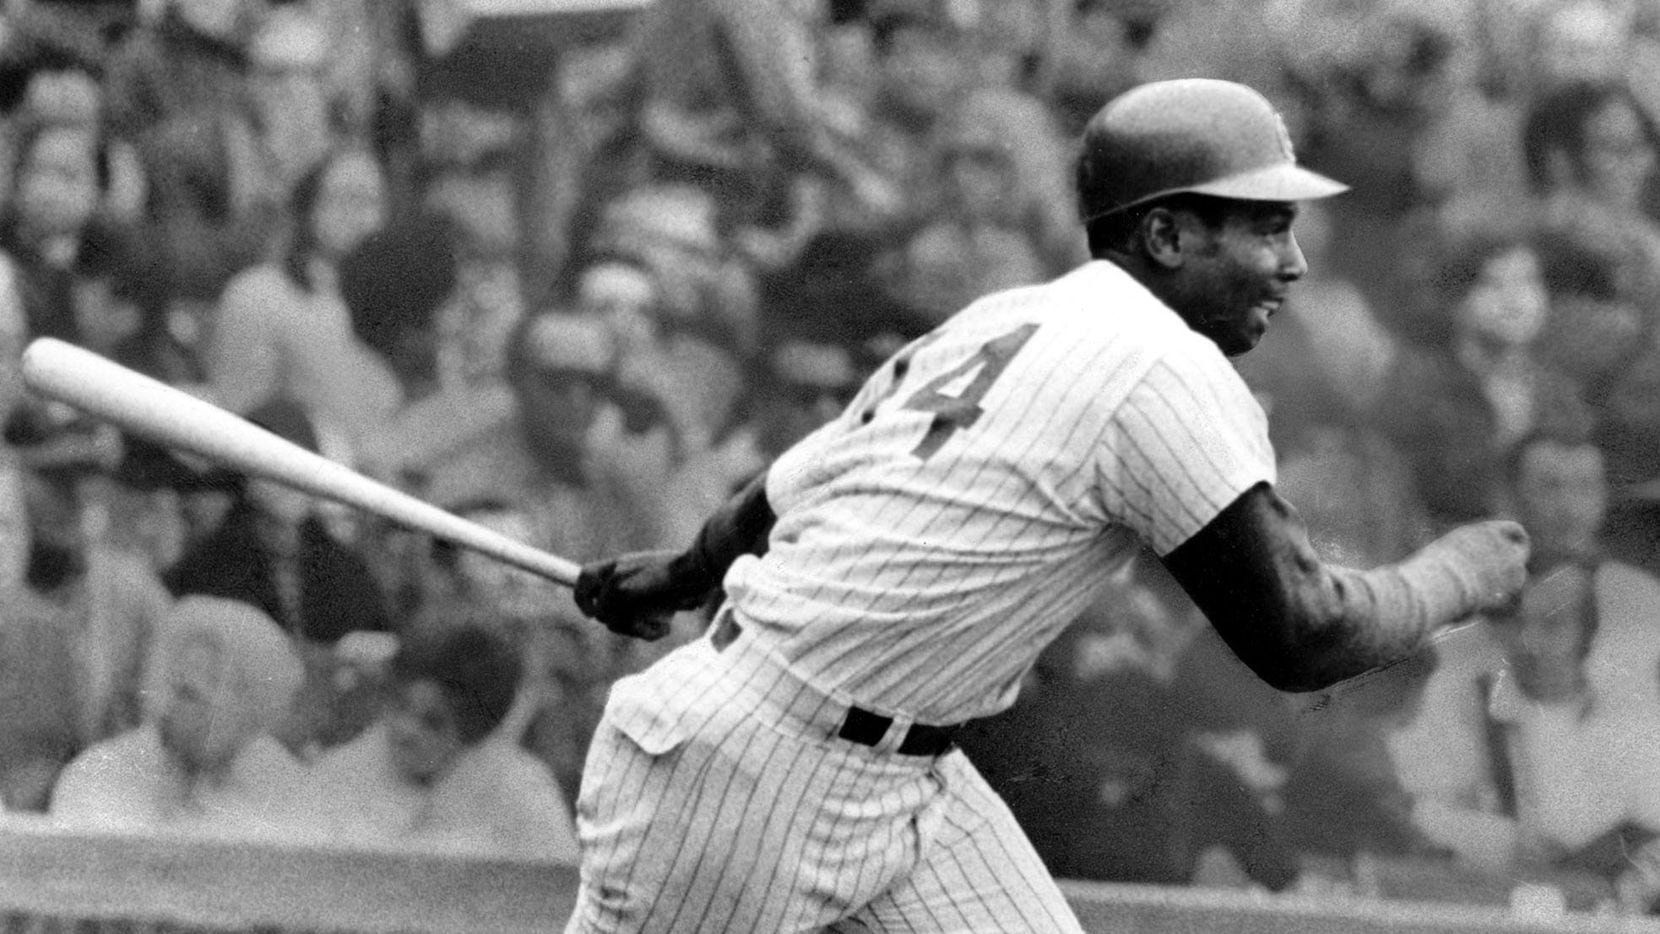 Playing for a final home run: to honor Dallas' own Mr. Cub, Ernie Banks